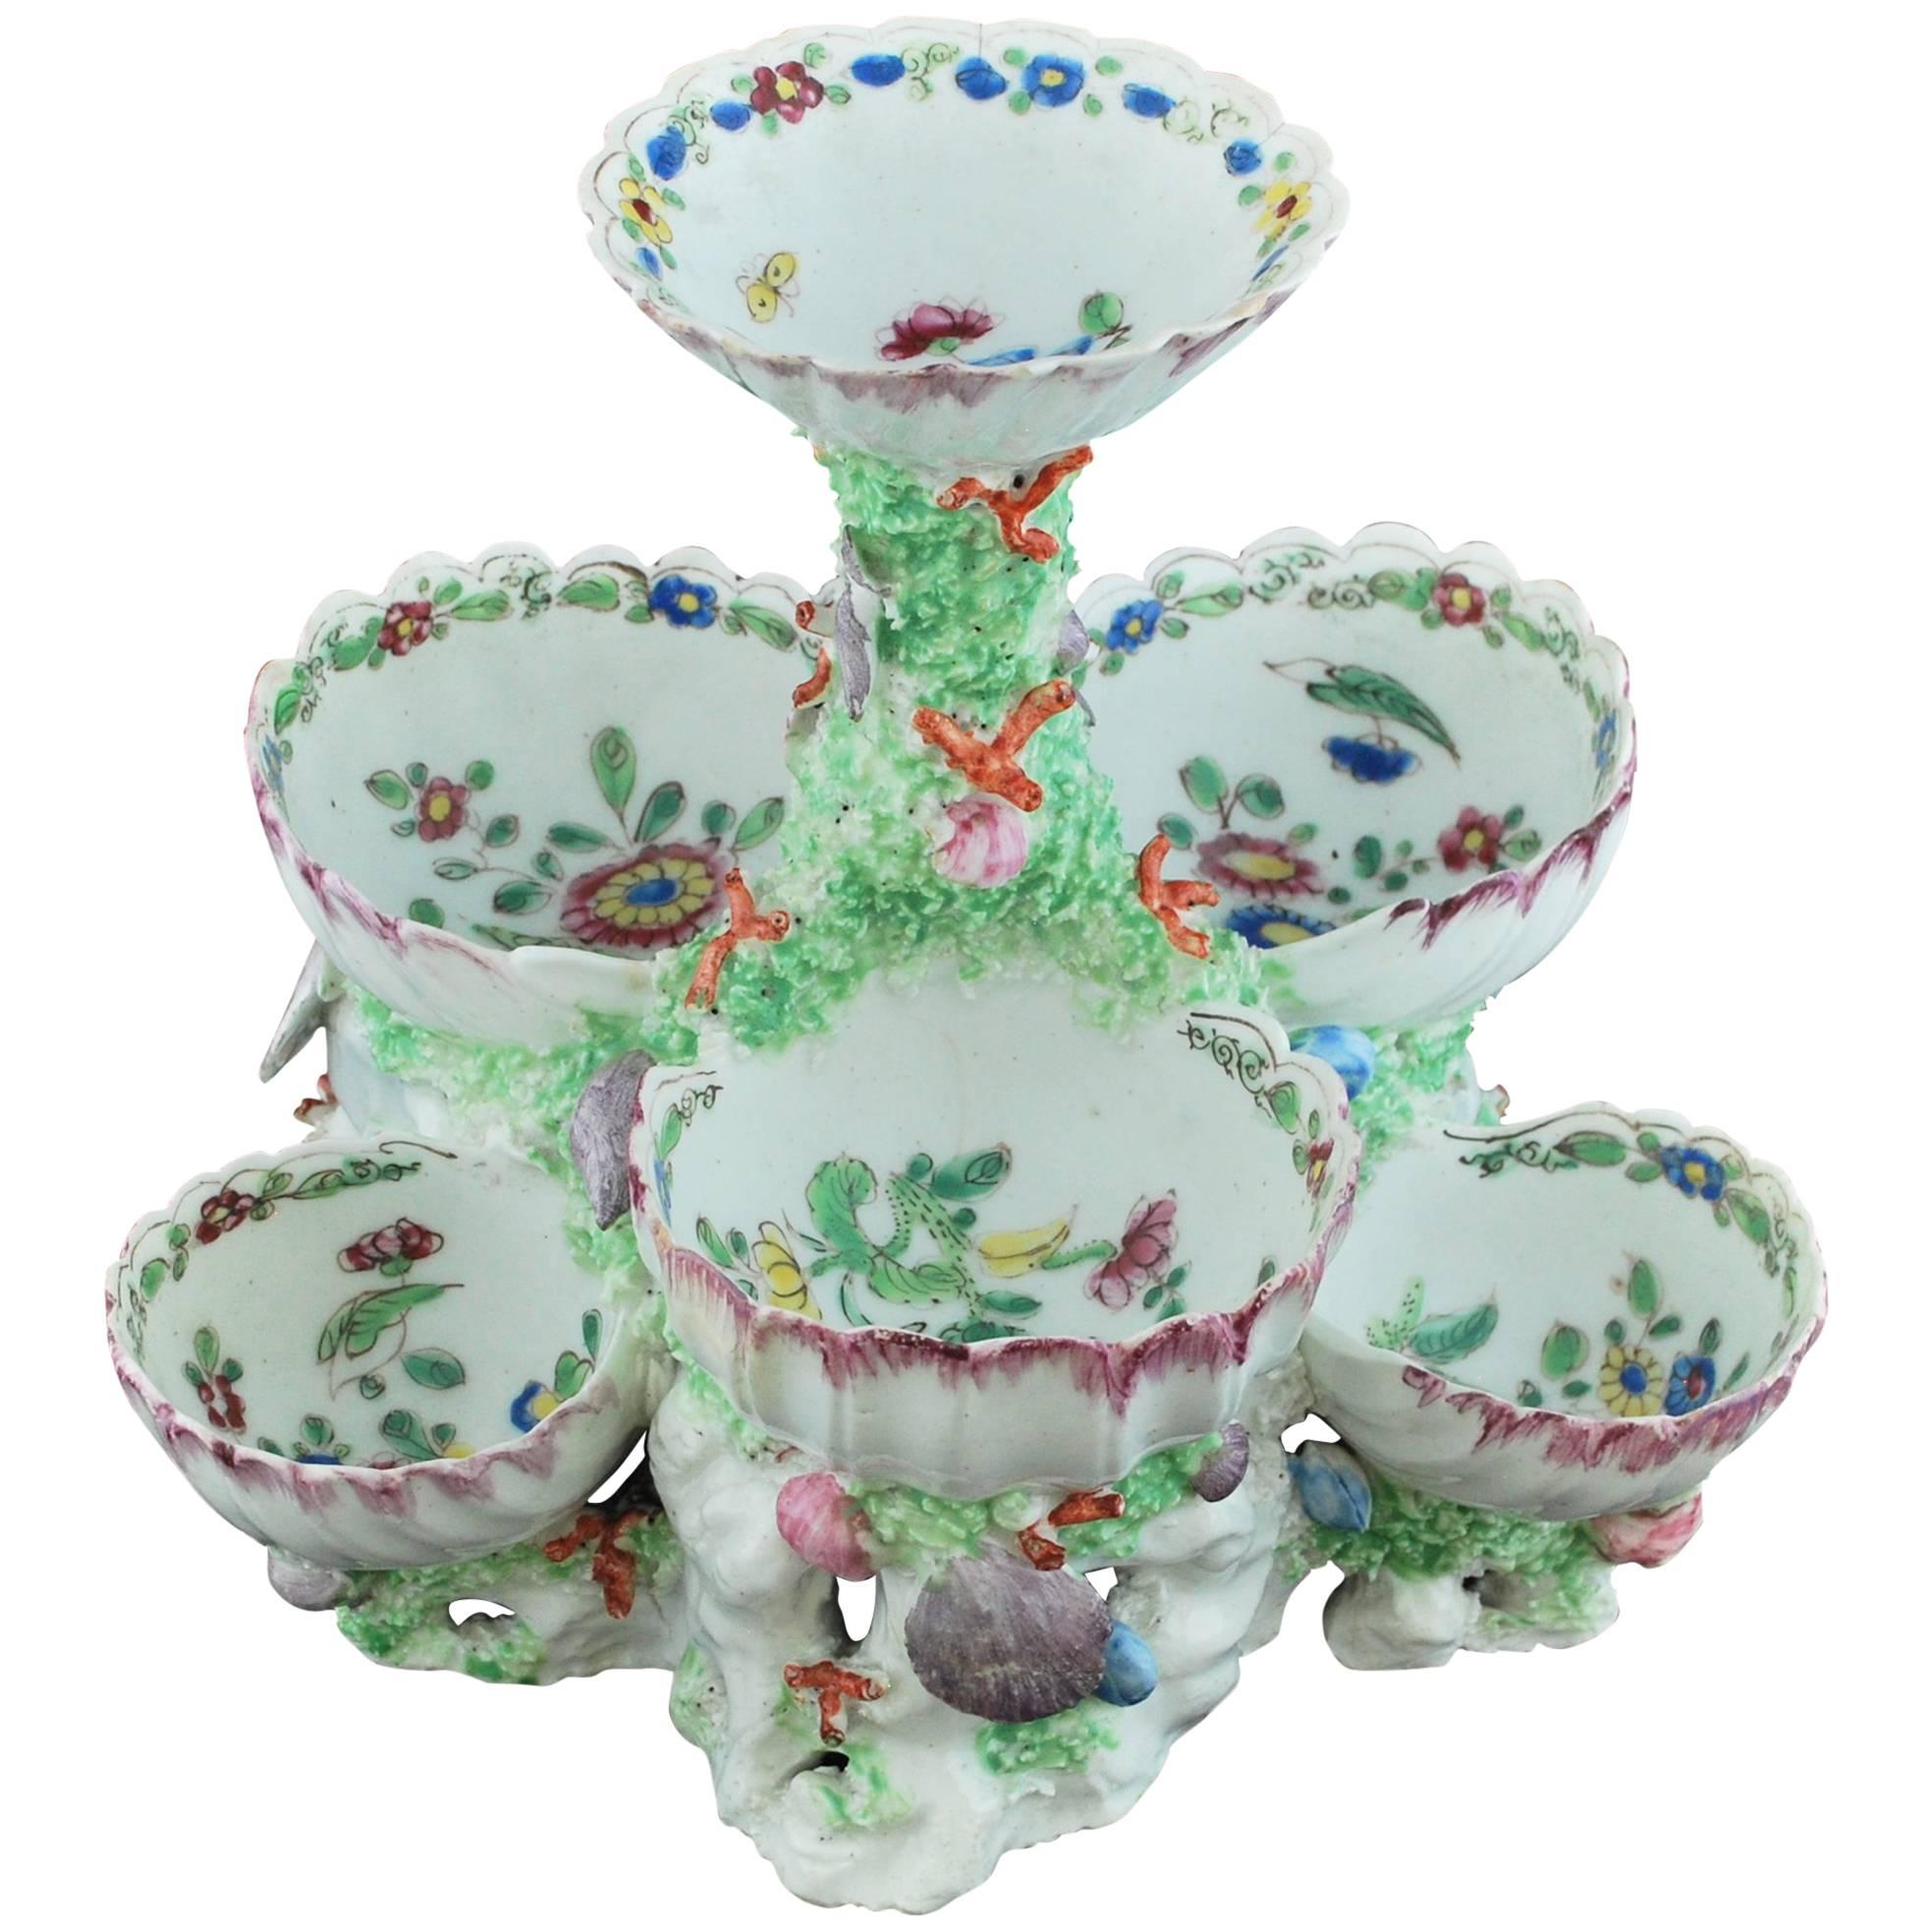 Sweetmeat Stand Shell, Bow Porcelain, circa 1750